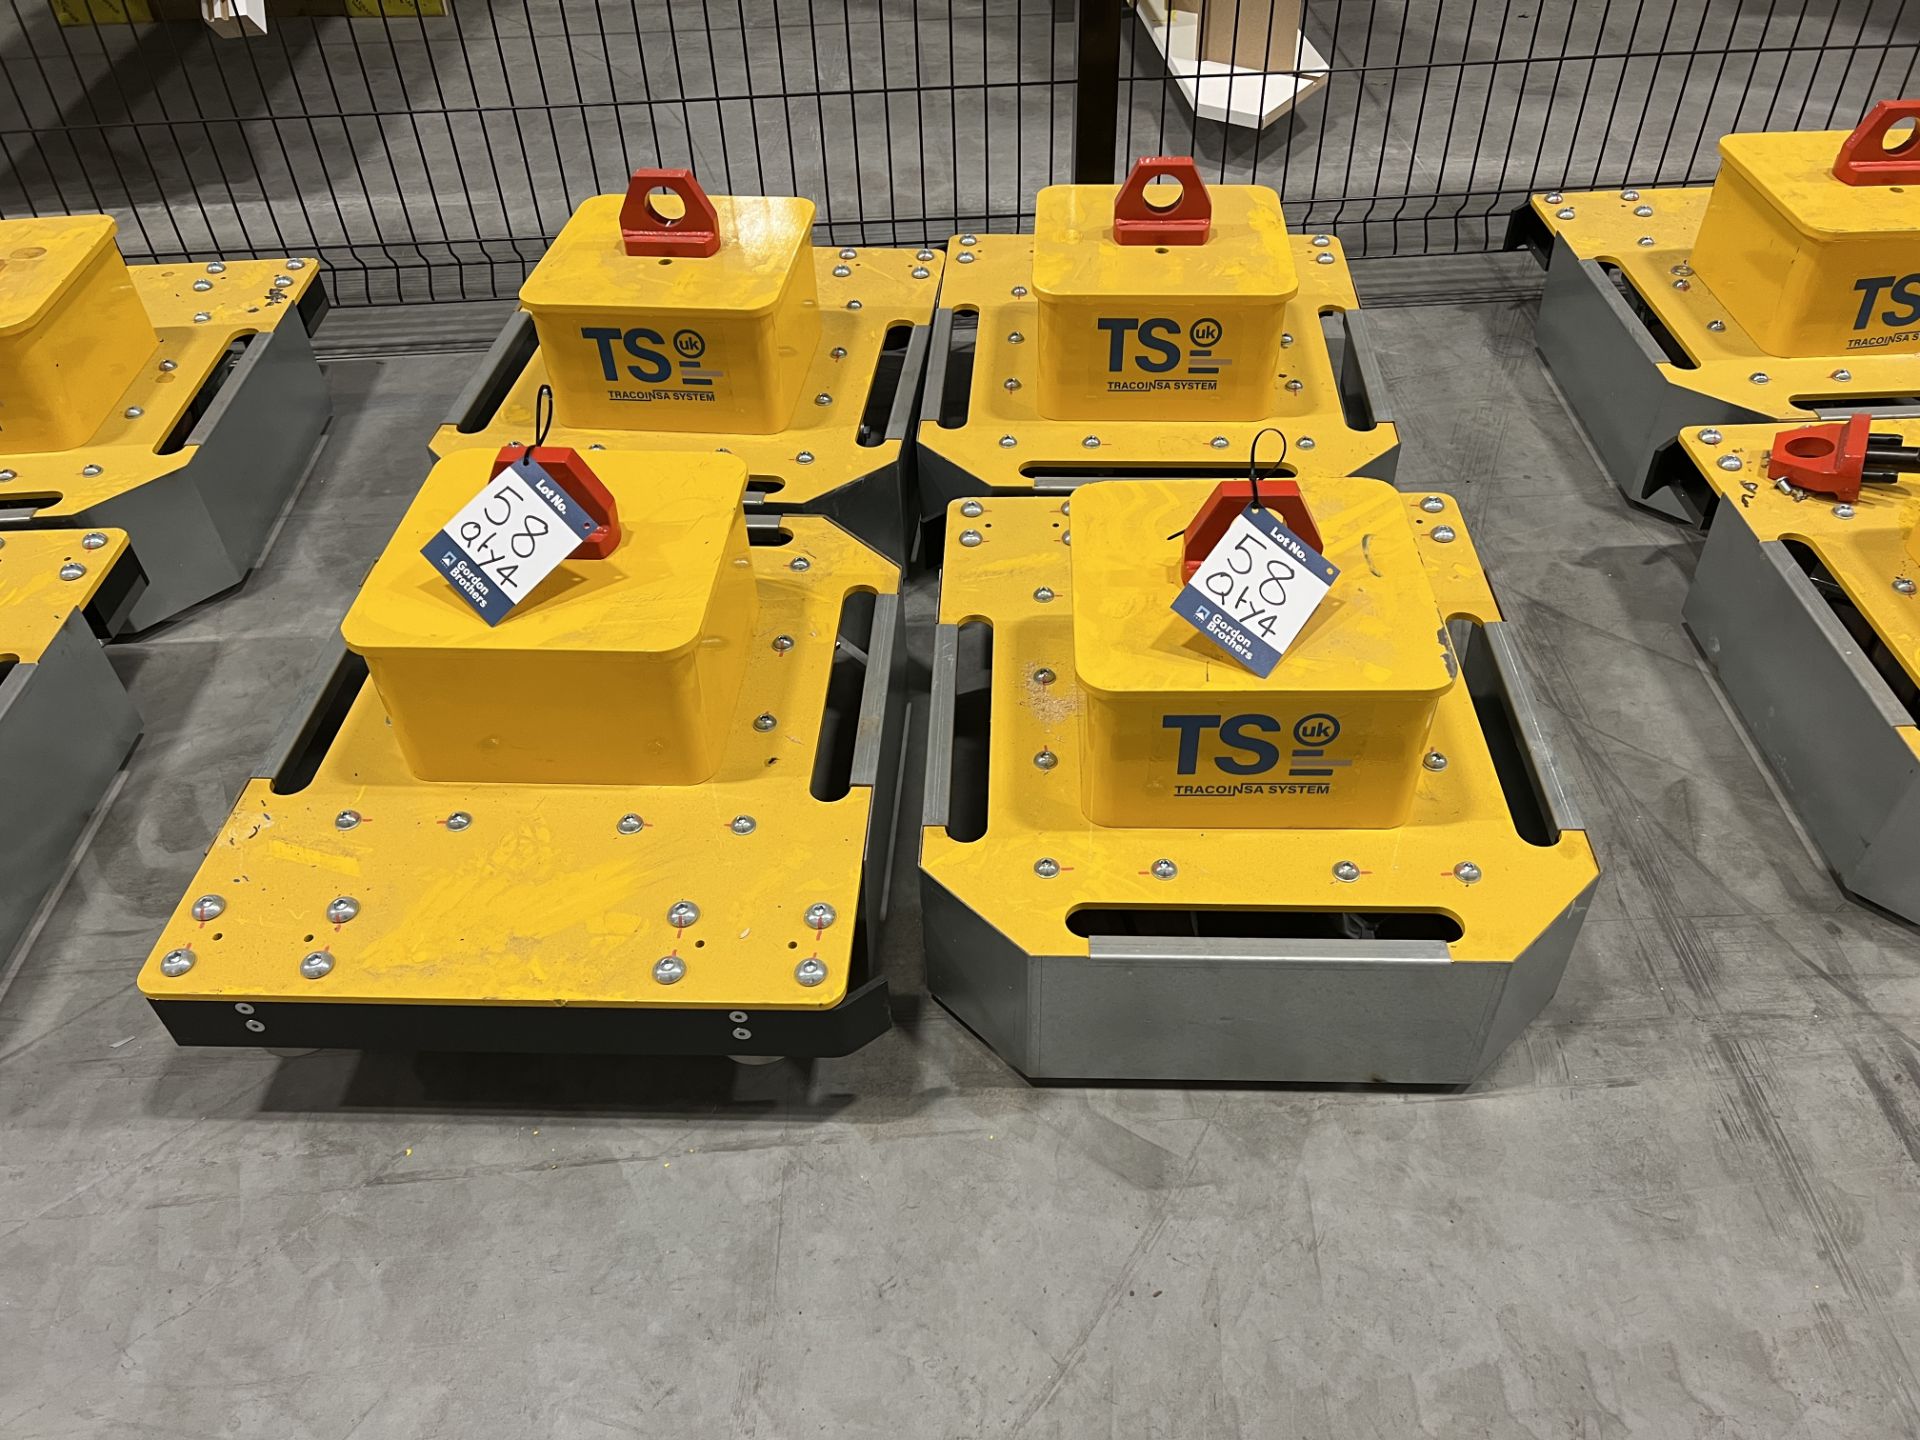 Heavy duty skates (2021) from lot 21 the Tracoinsa Systems UK conveying system this lot will